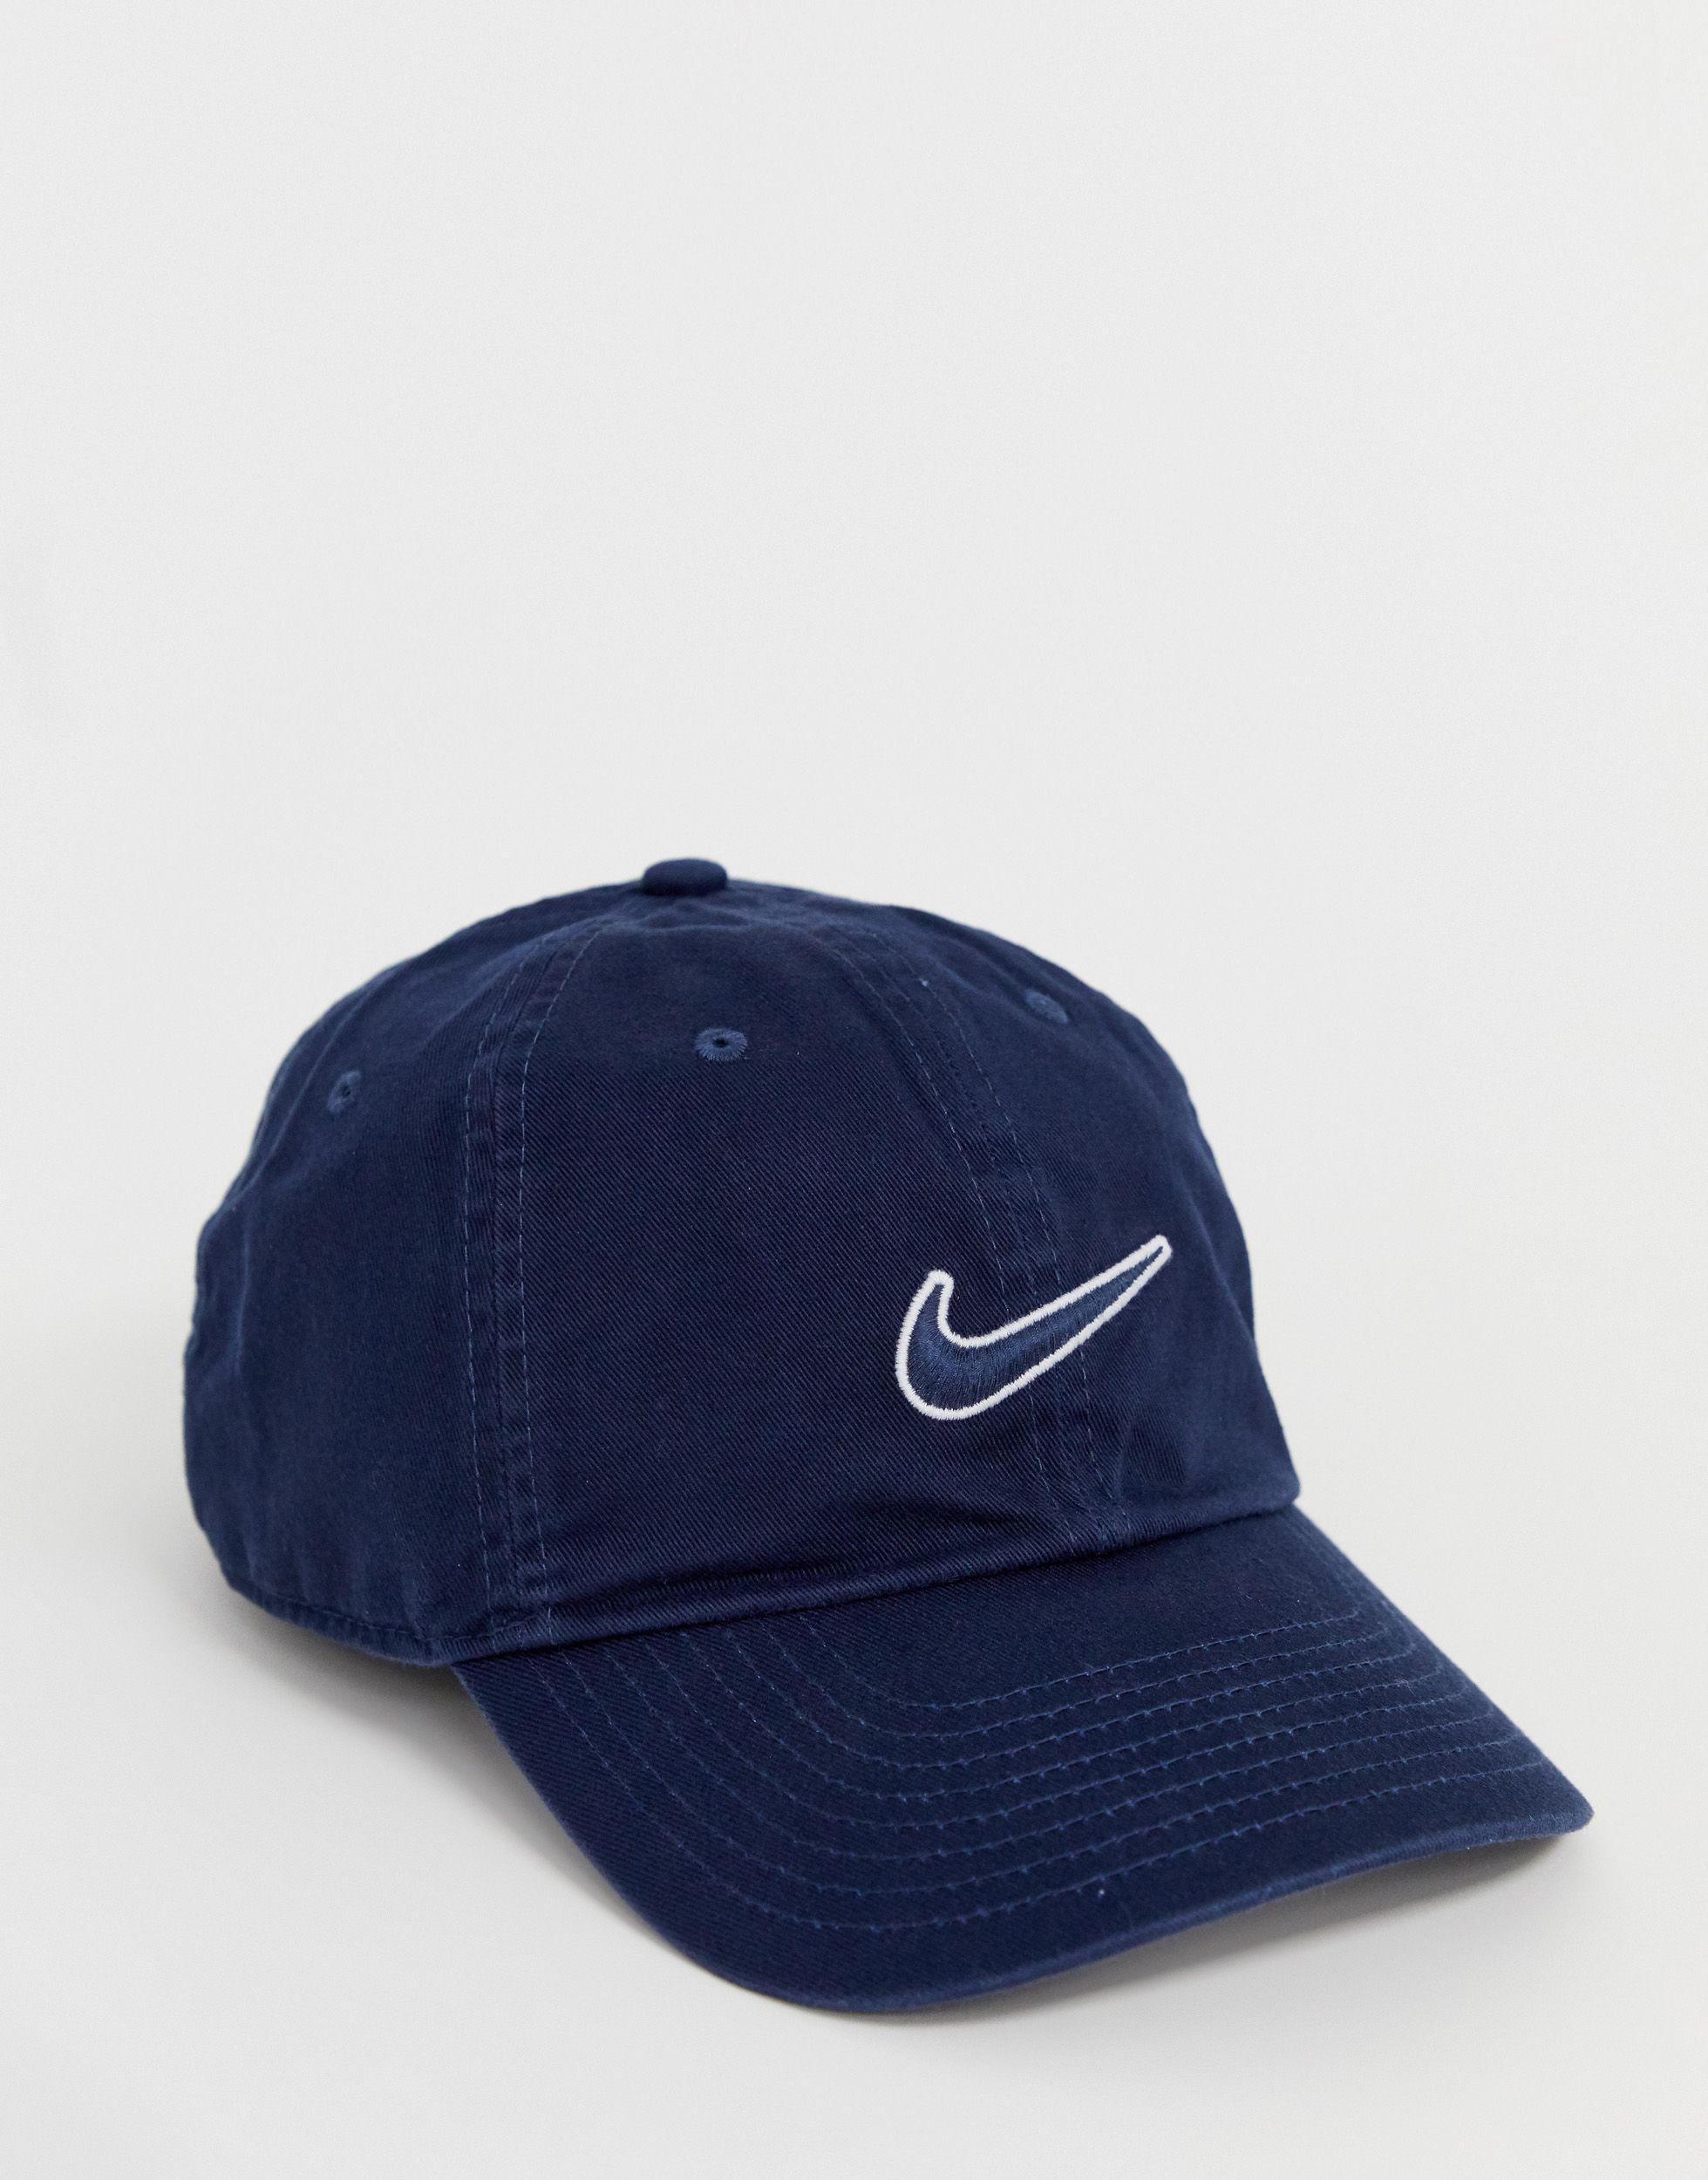 Nike H86 Swoosh Washed Cap in Navy (Blue) for Men - Lyst